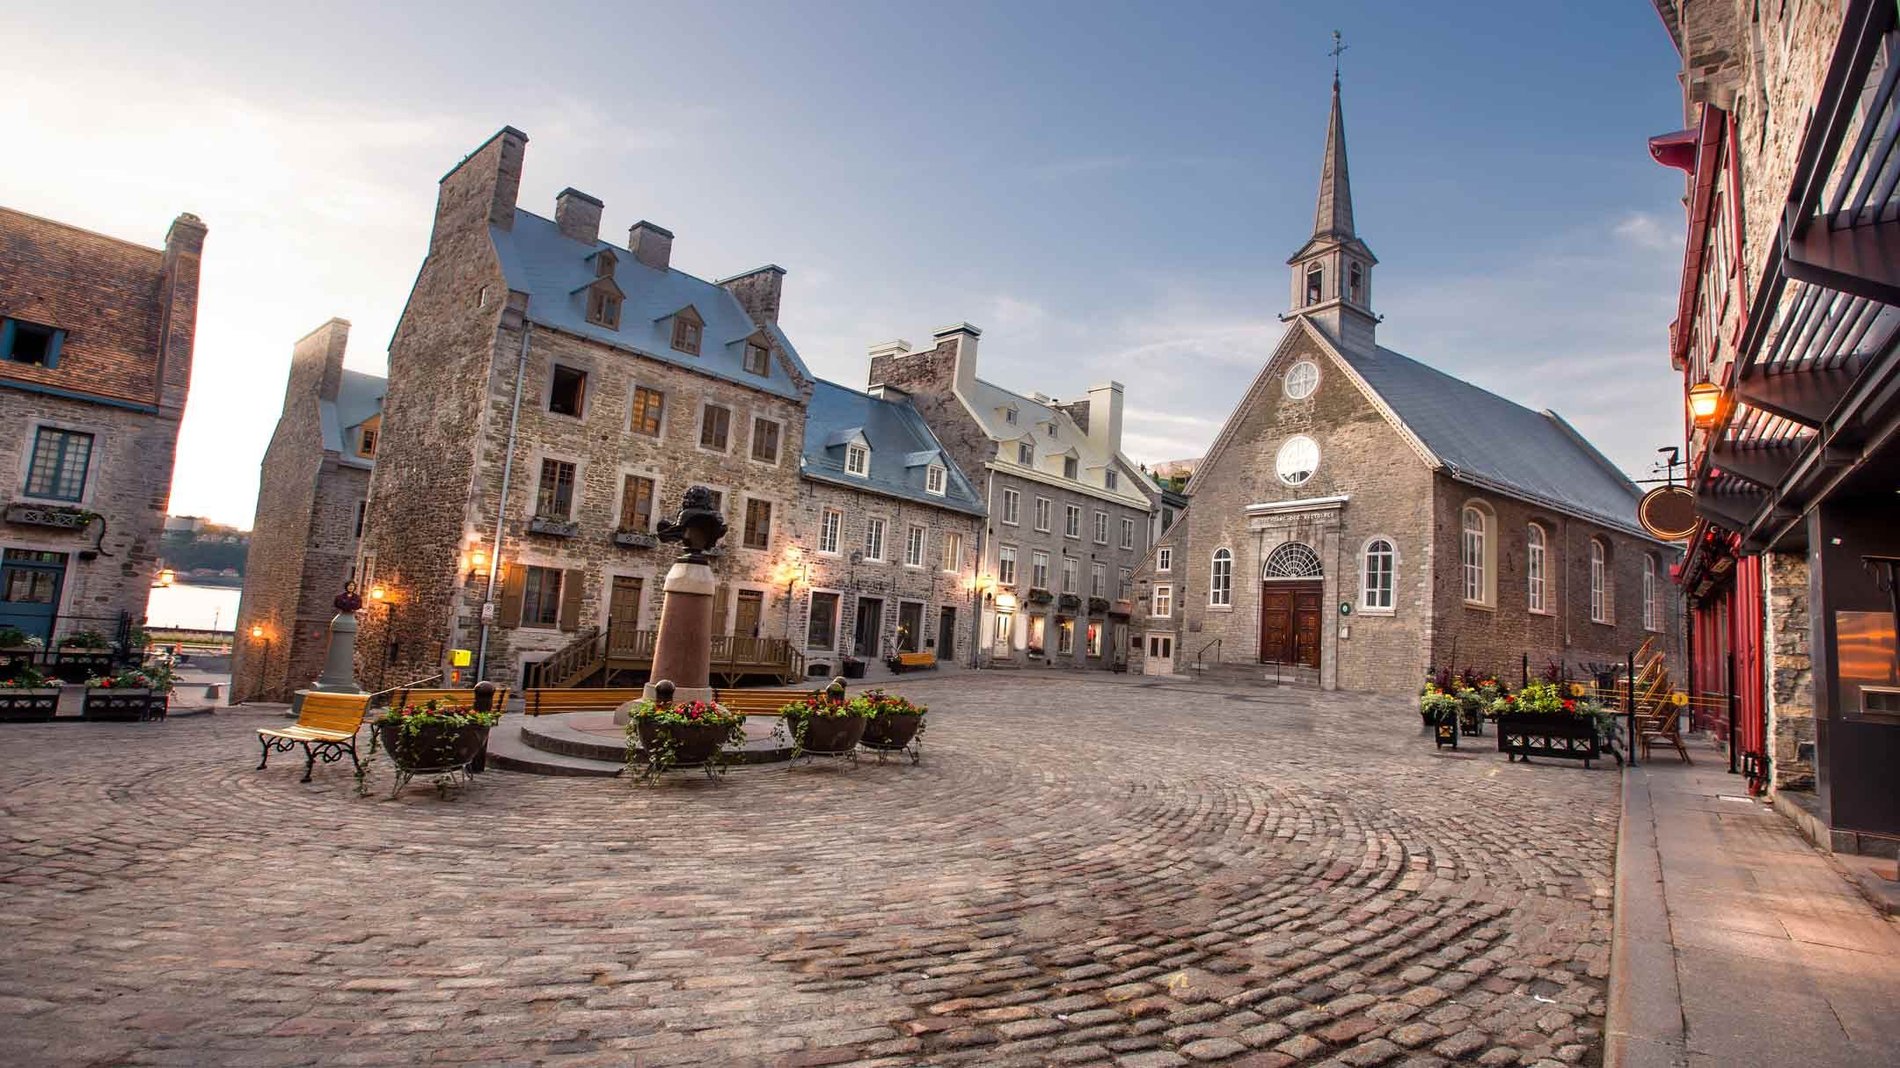 The Petit Champlain District of Old Quebec City